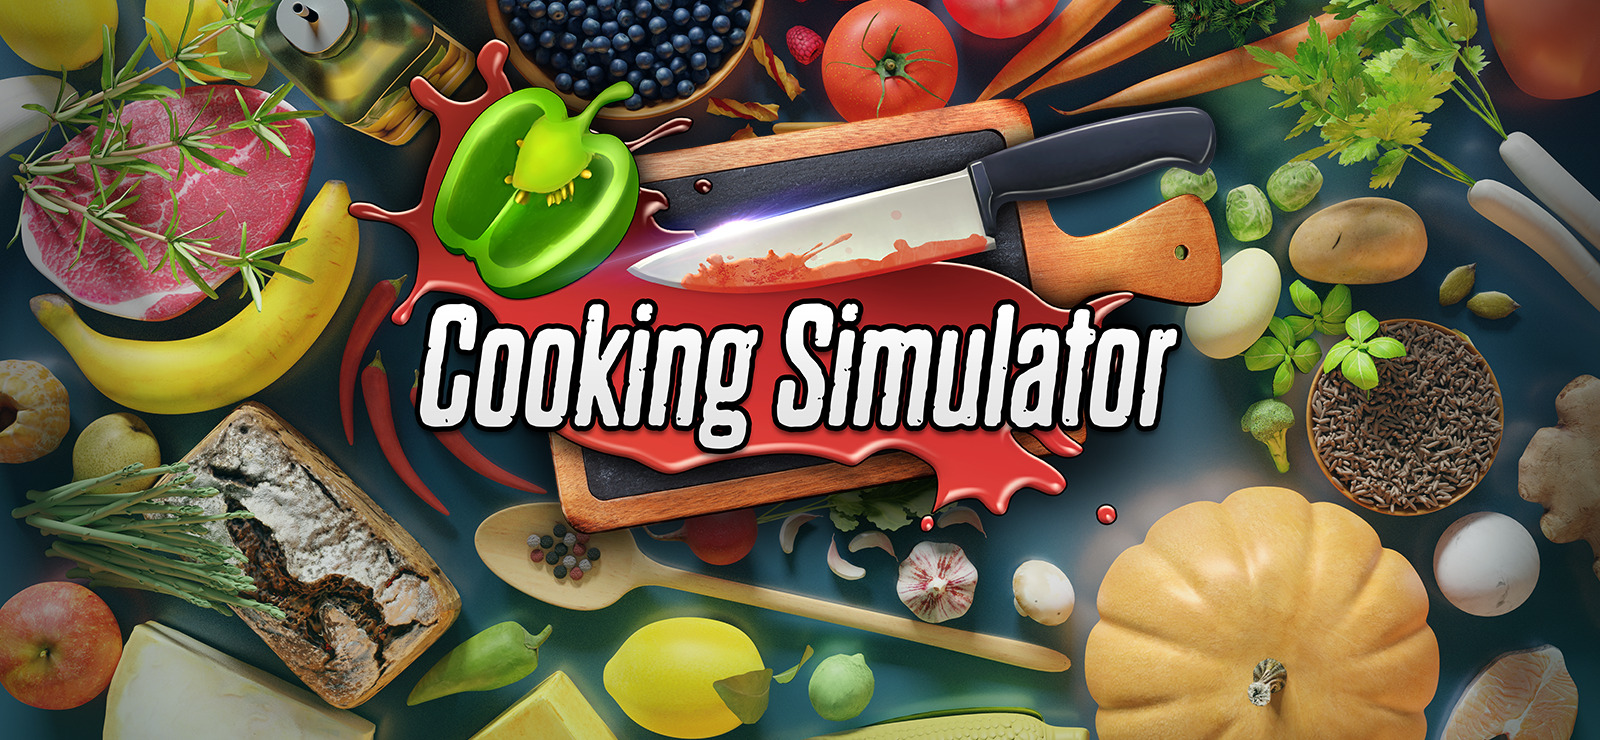 COOKING SIMULATOR, DAY 1, TRAINING CAMP